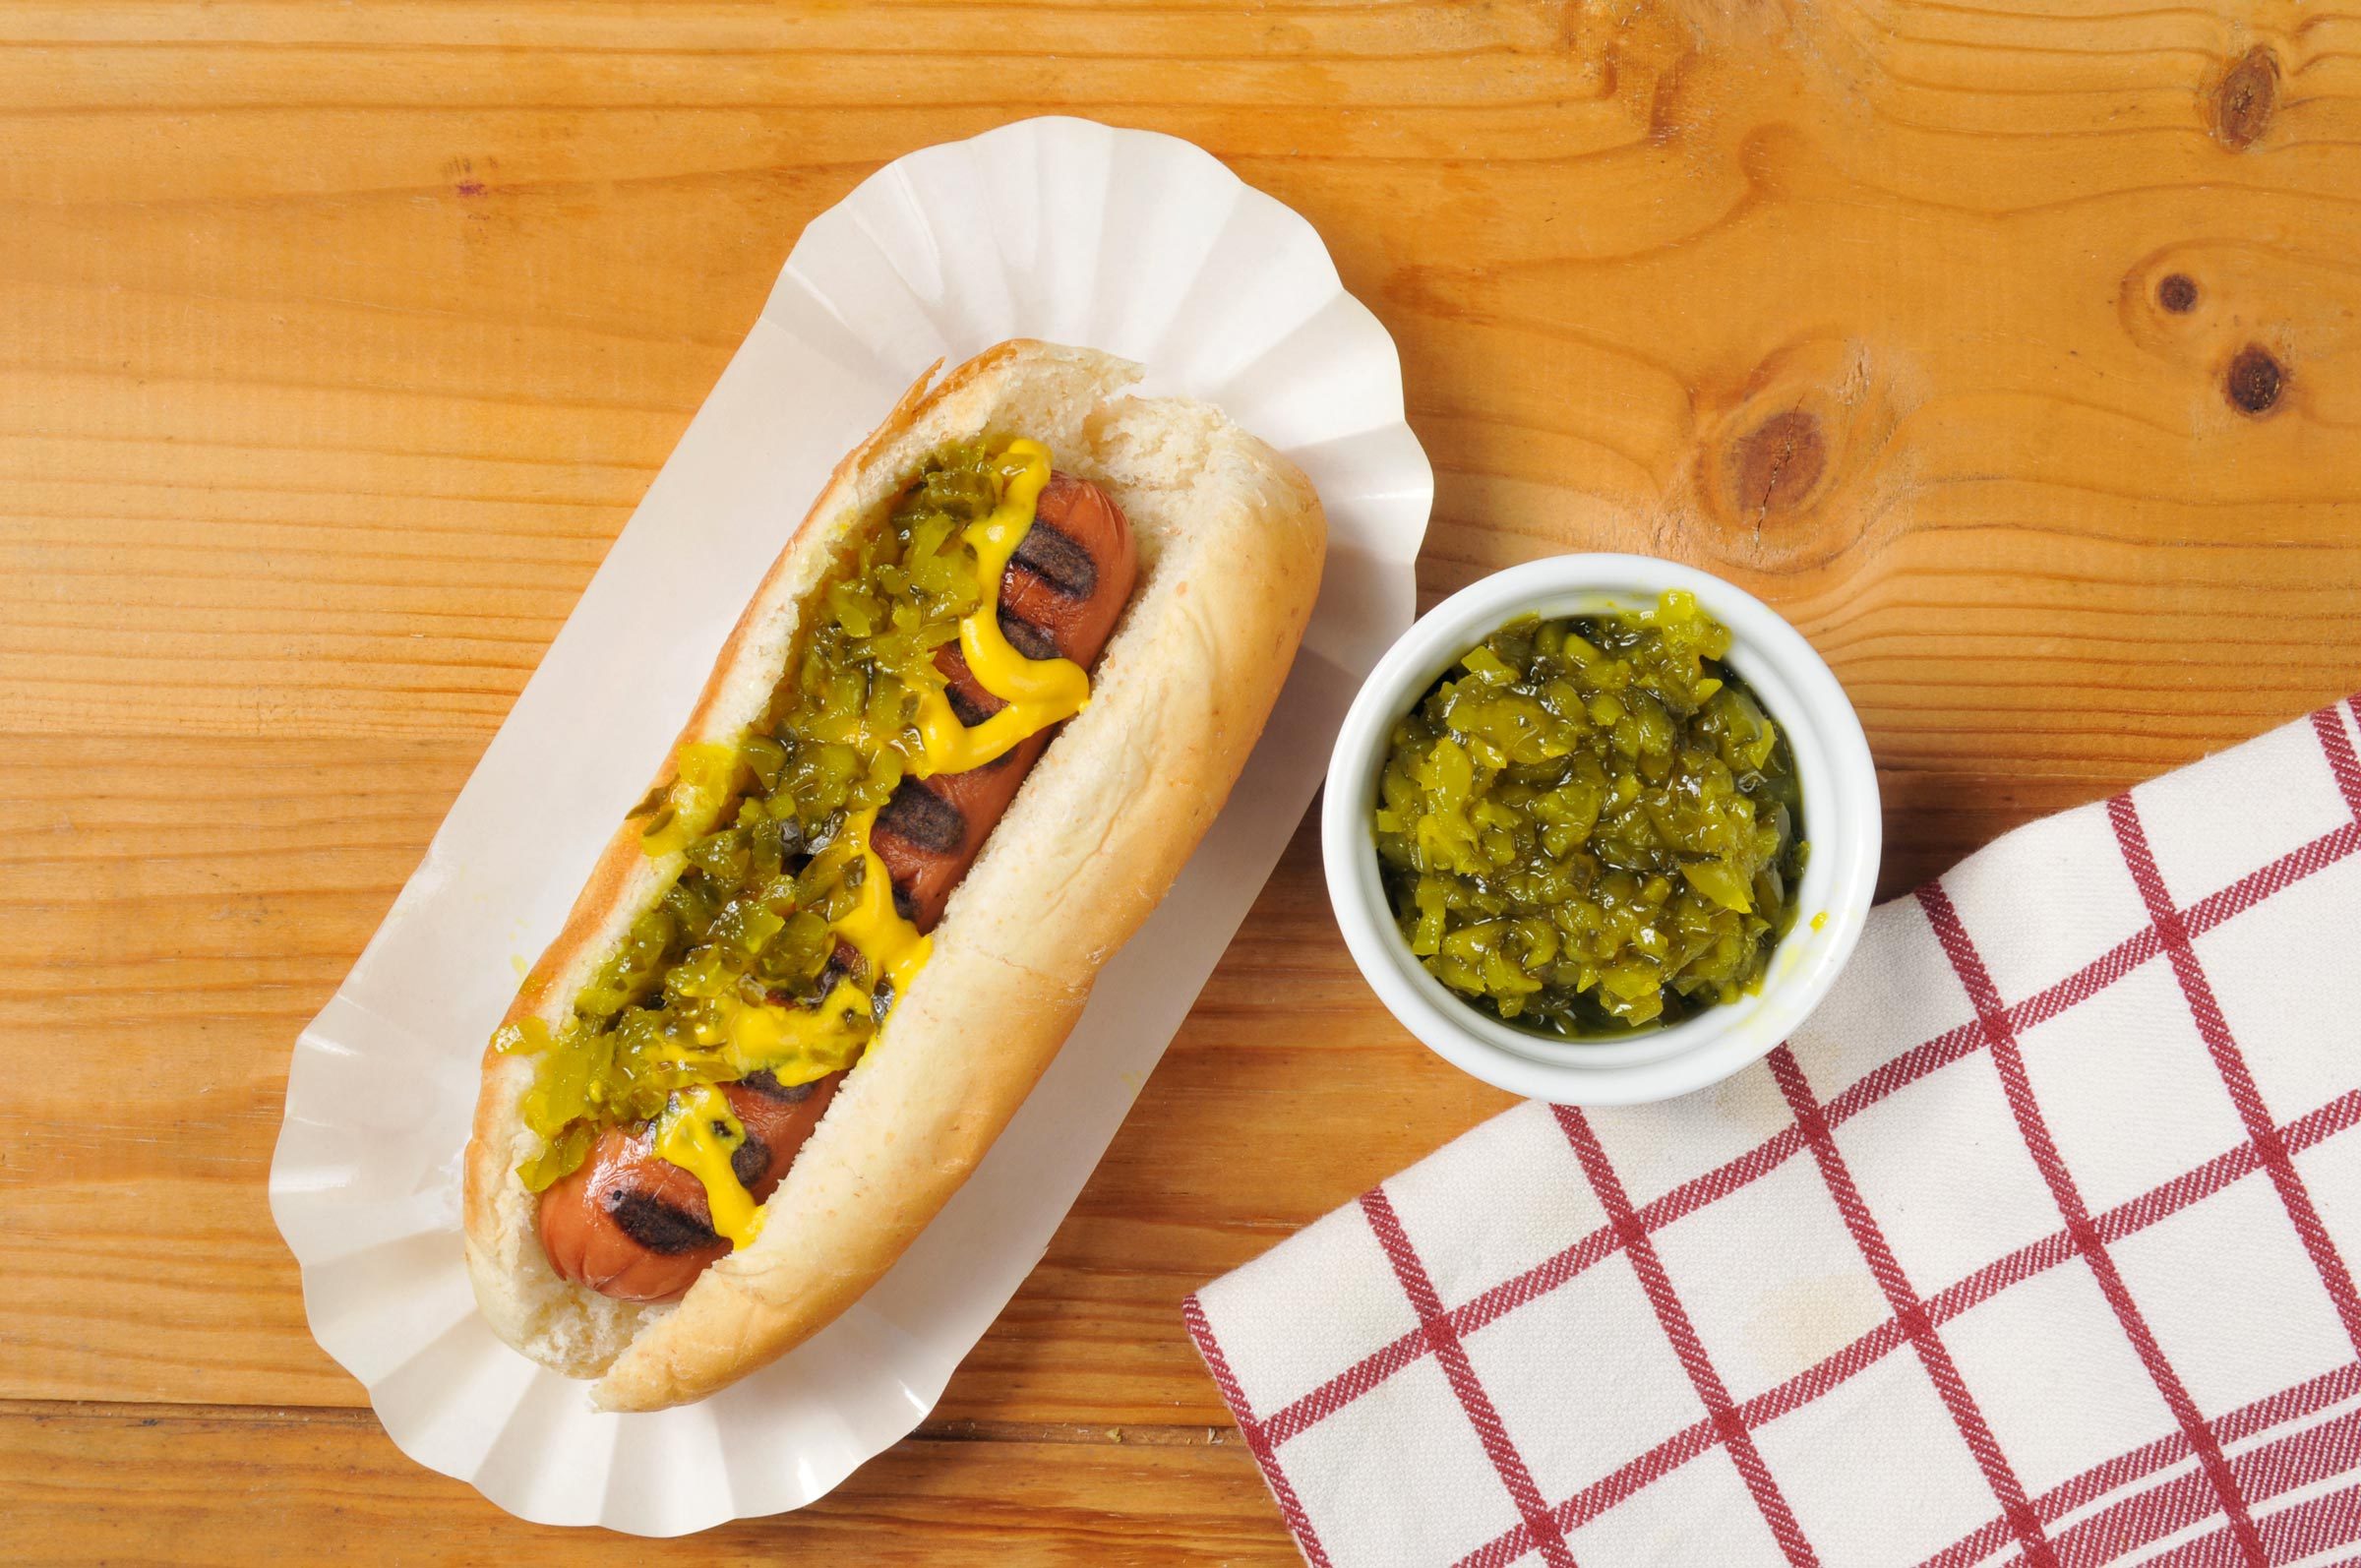 Get your hot dogs (and much more) here. A guide to eating at